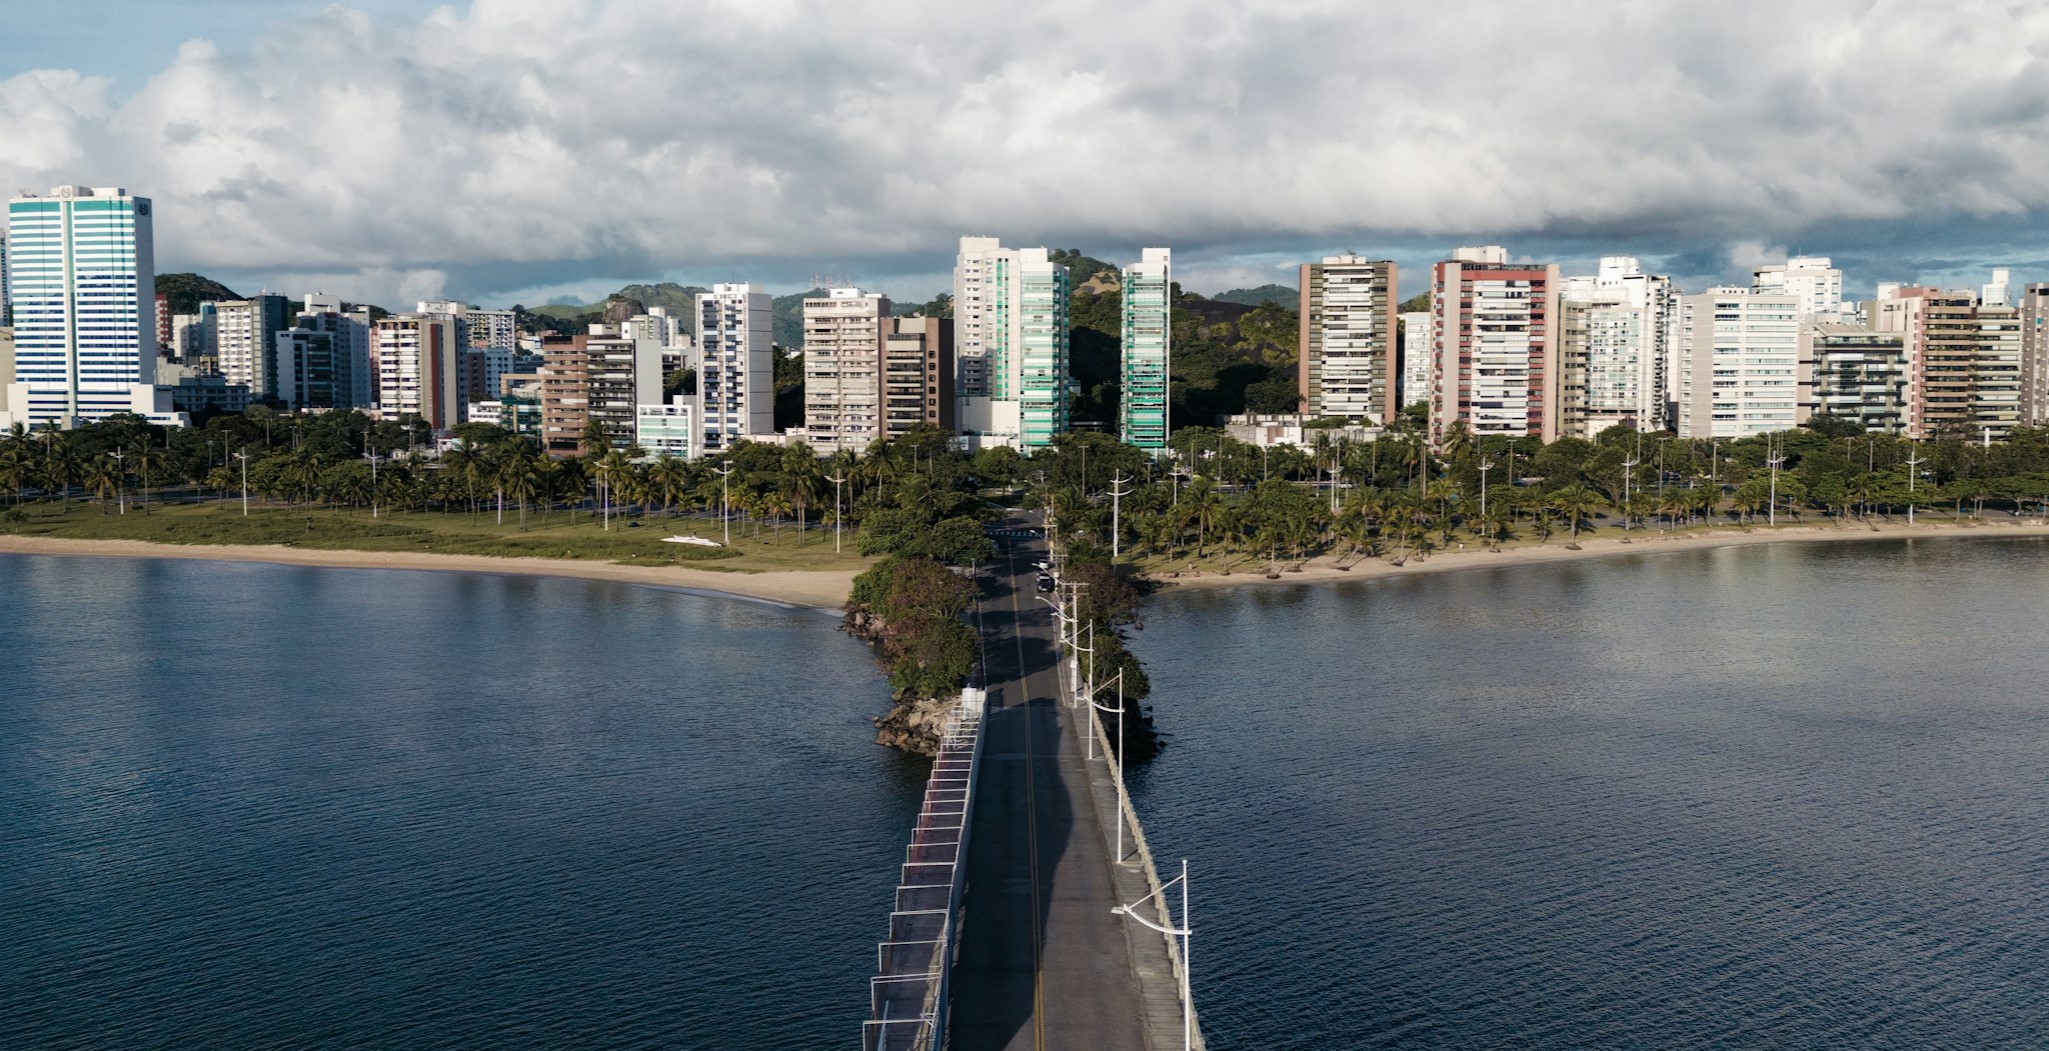 A bridge surrounded on both sides by water, headed into a city with a tree-covered coastline.